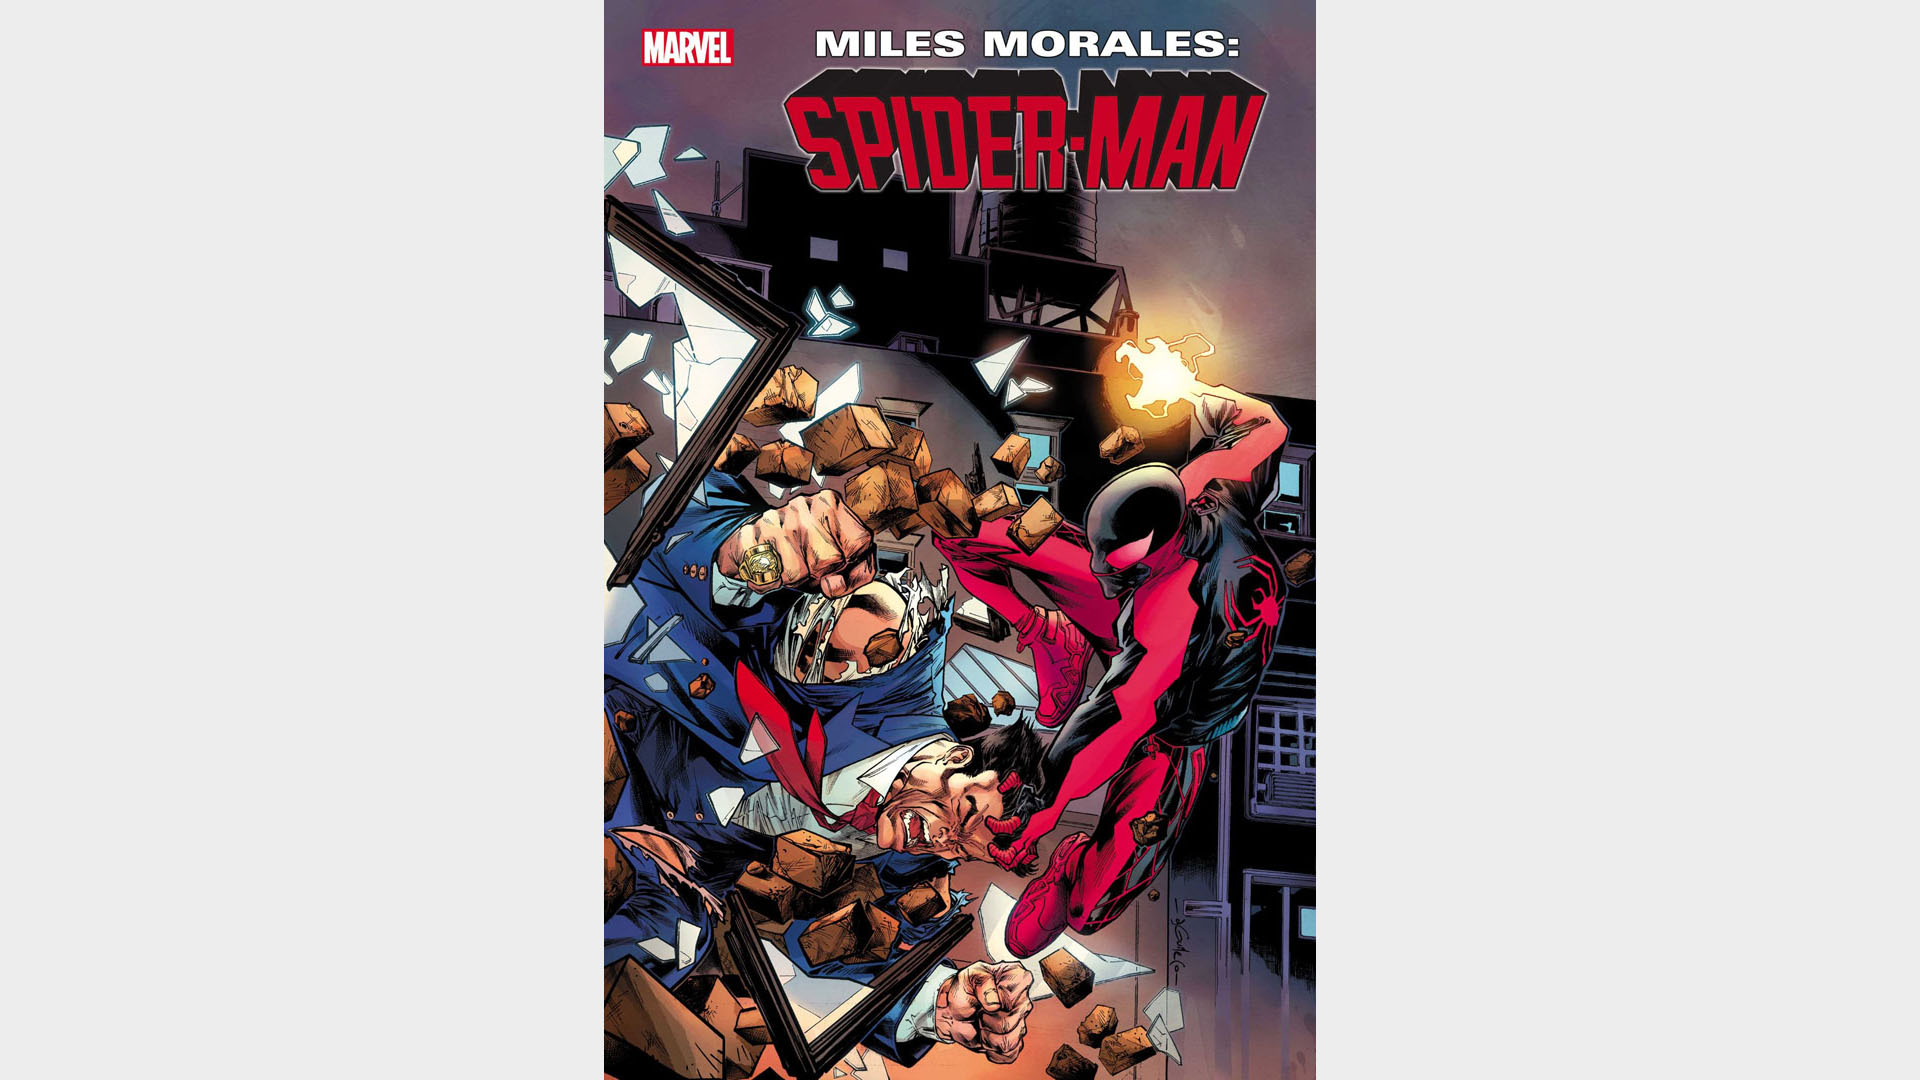 Miles Morales: Spider-Man #36 cover